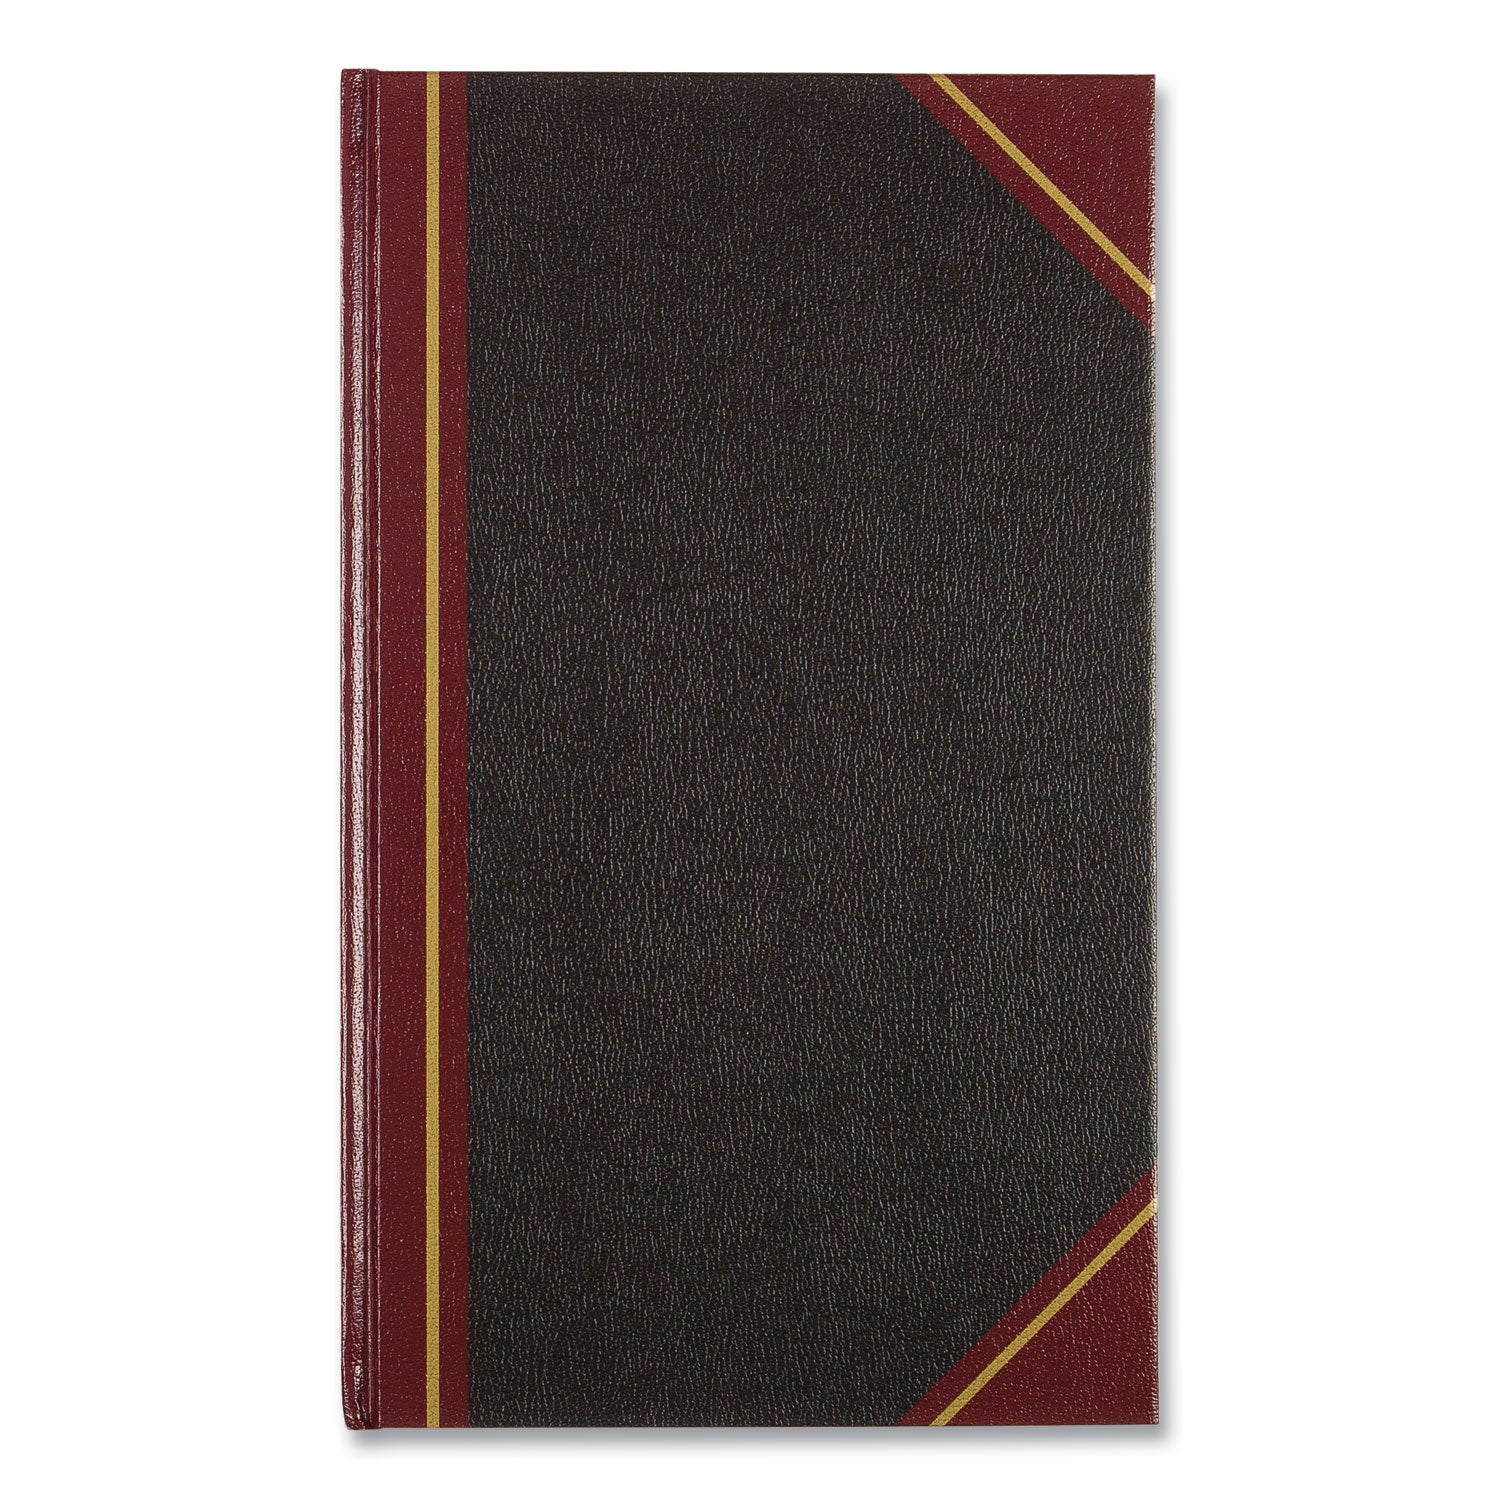 Texthide Eye-Ease Record Book, Black/Burgundy/Gold Cover, 14.25 x 8.75 Sheets, 300 Sheets/Book - 